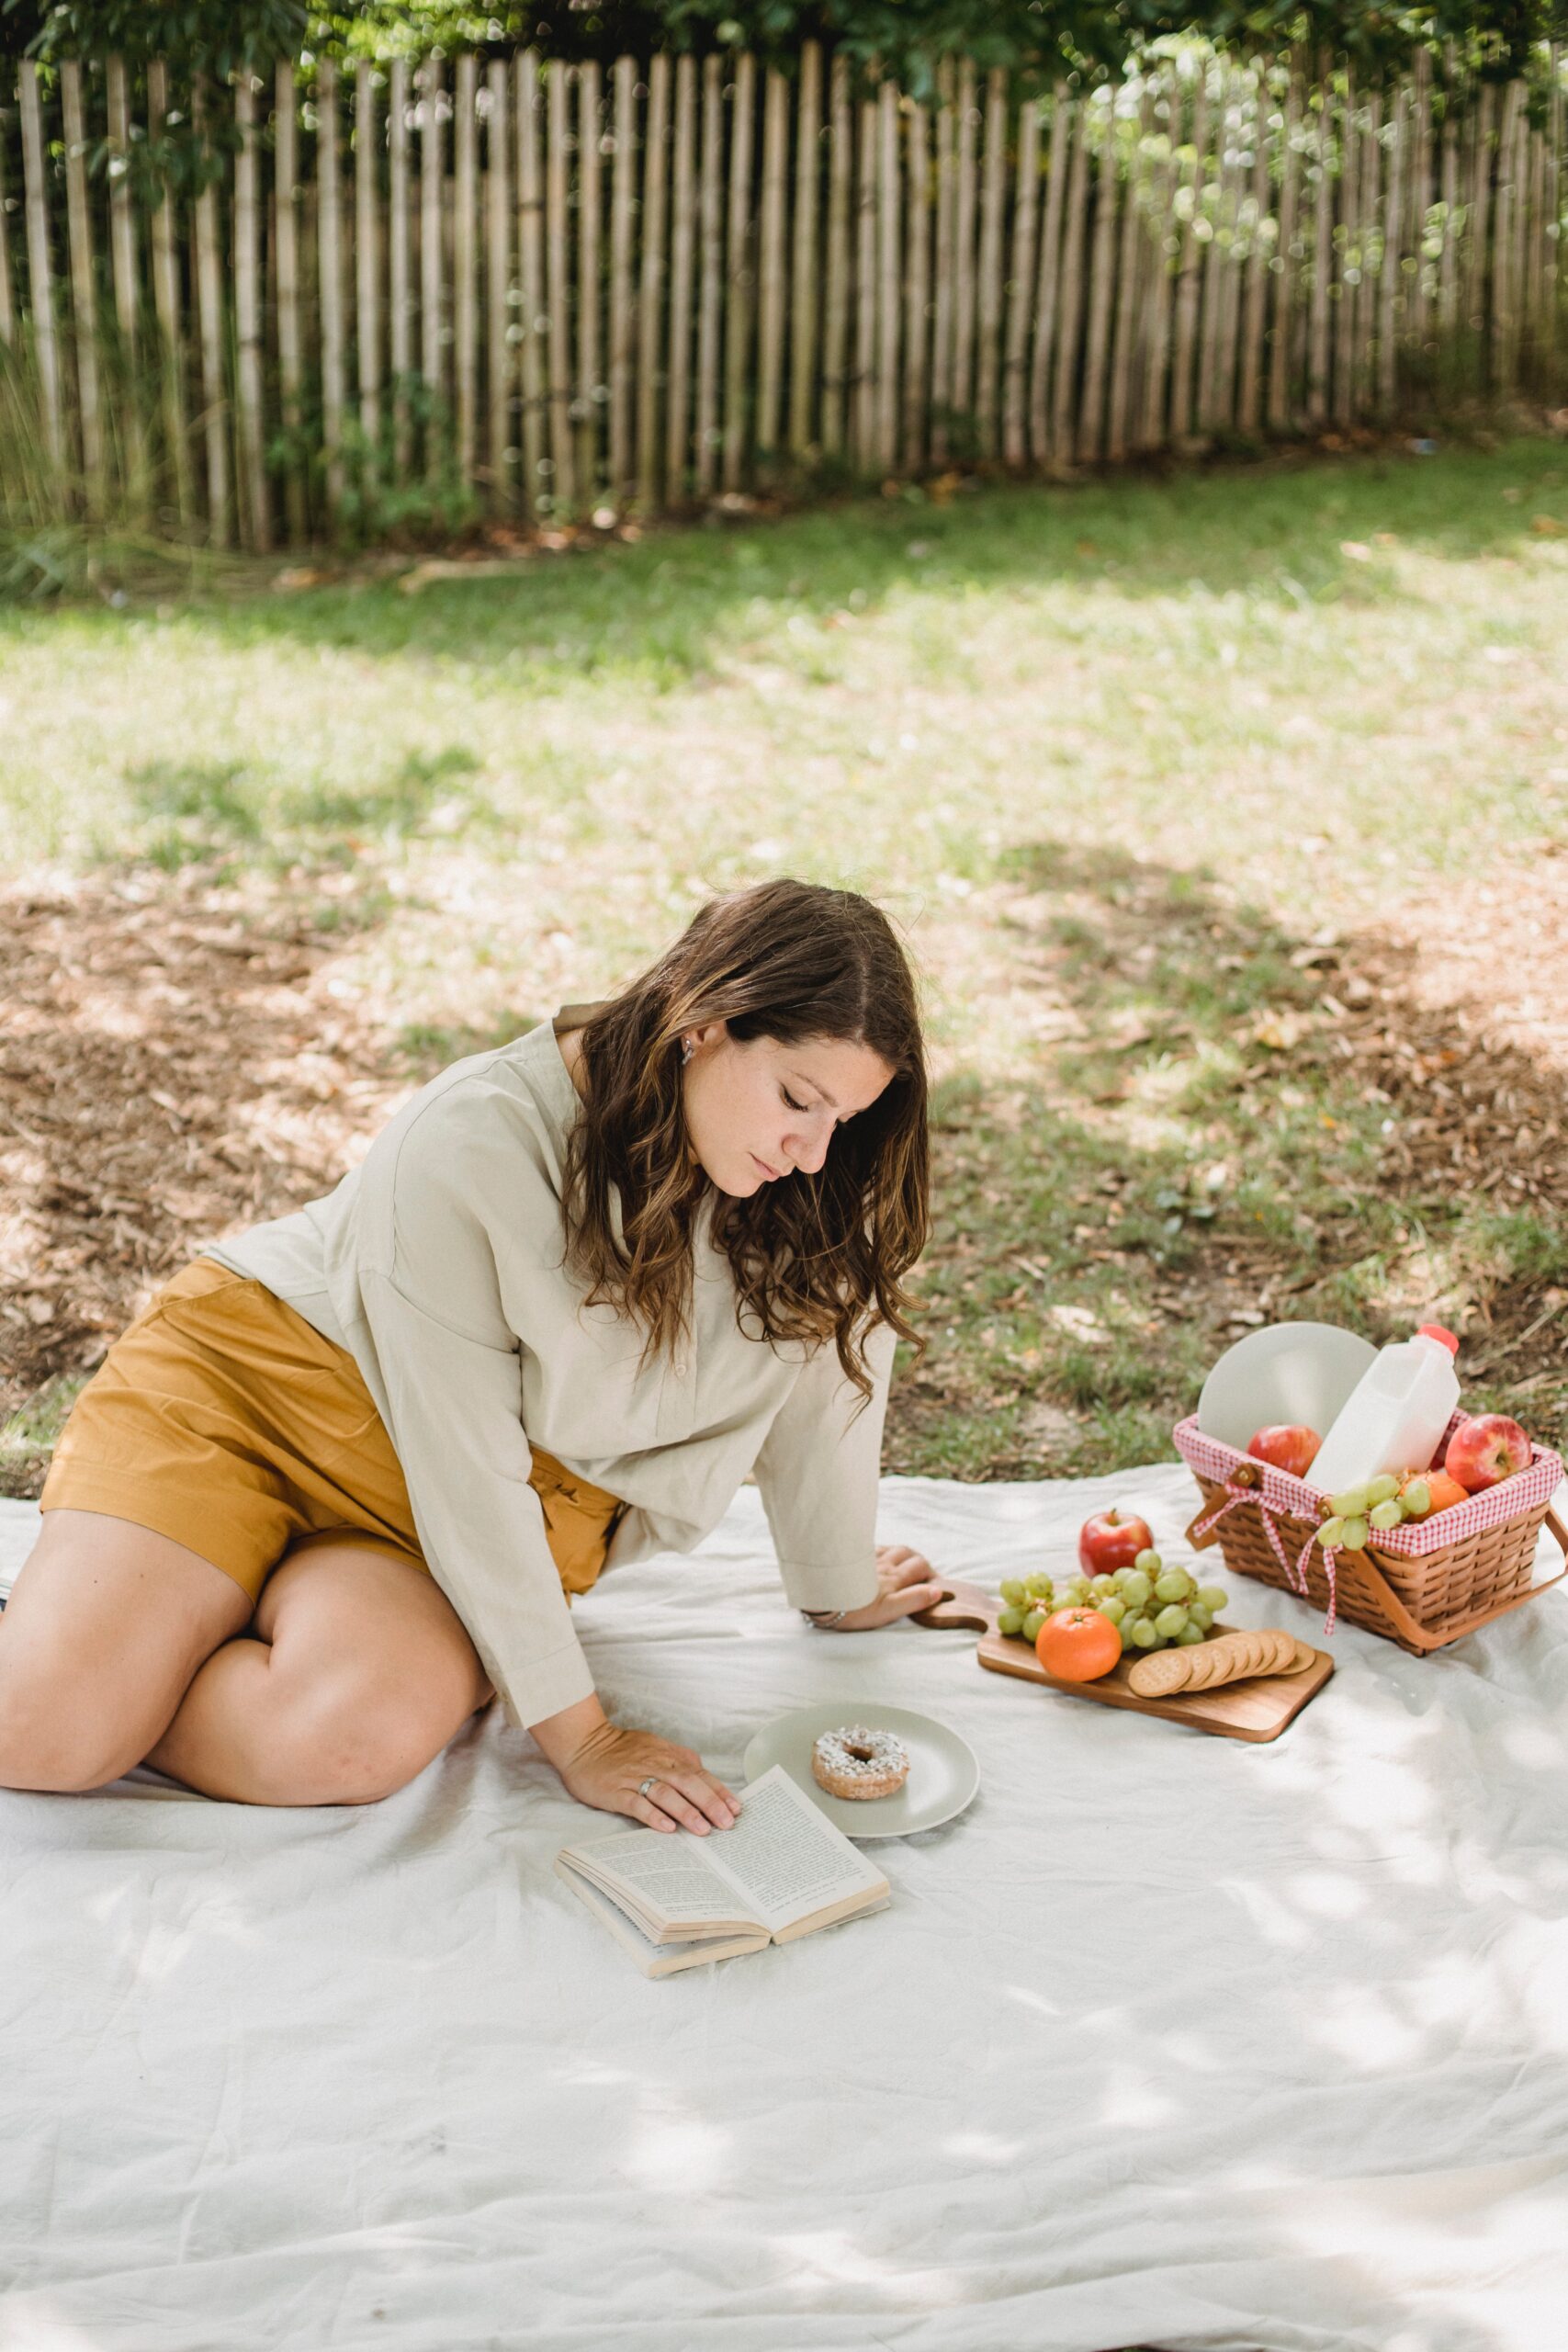 Pregnant woman in white top and yellow shorts sitting on picnic blanket reading a book with bagel and fruit.